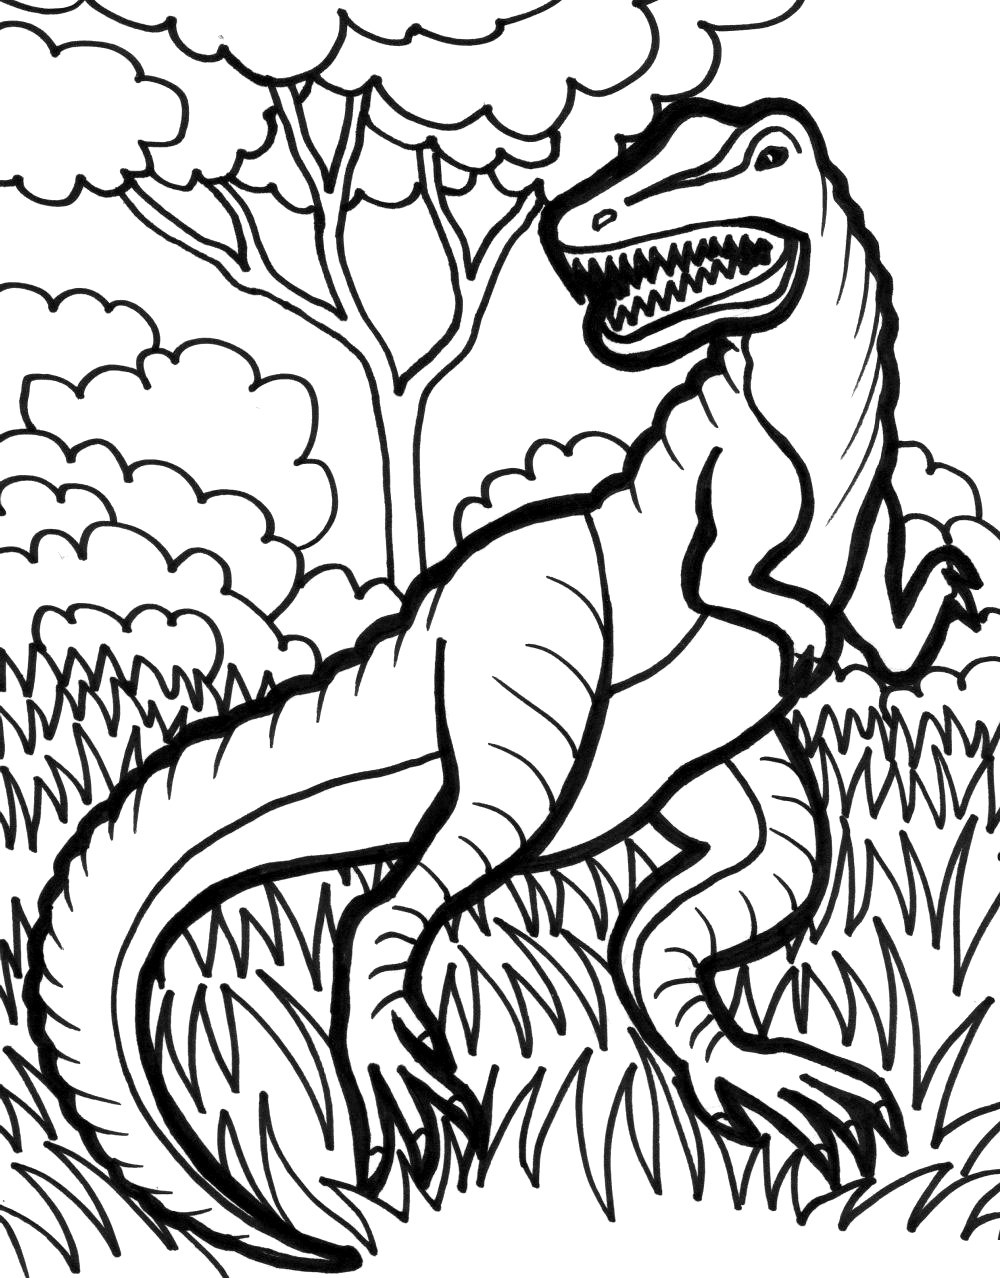 Trex Coloring Pages
 TRex Coloring Pages Best Coloring Pages For Kids